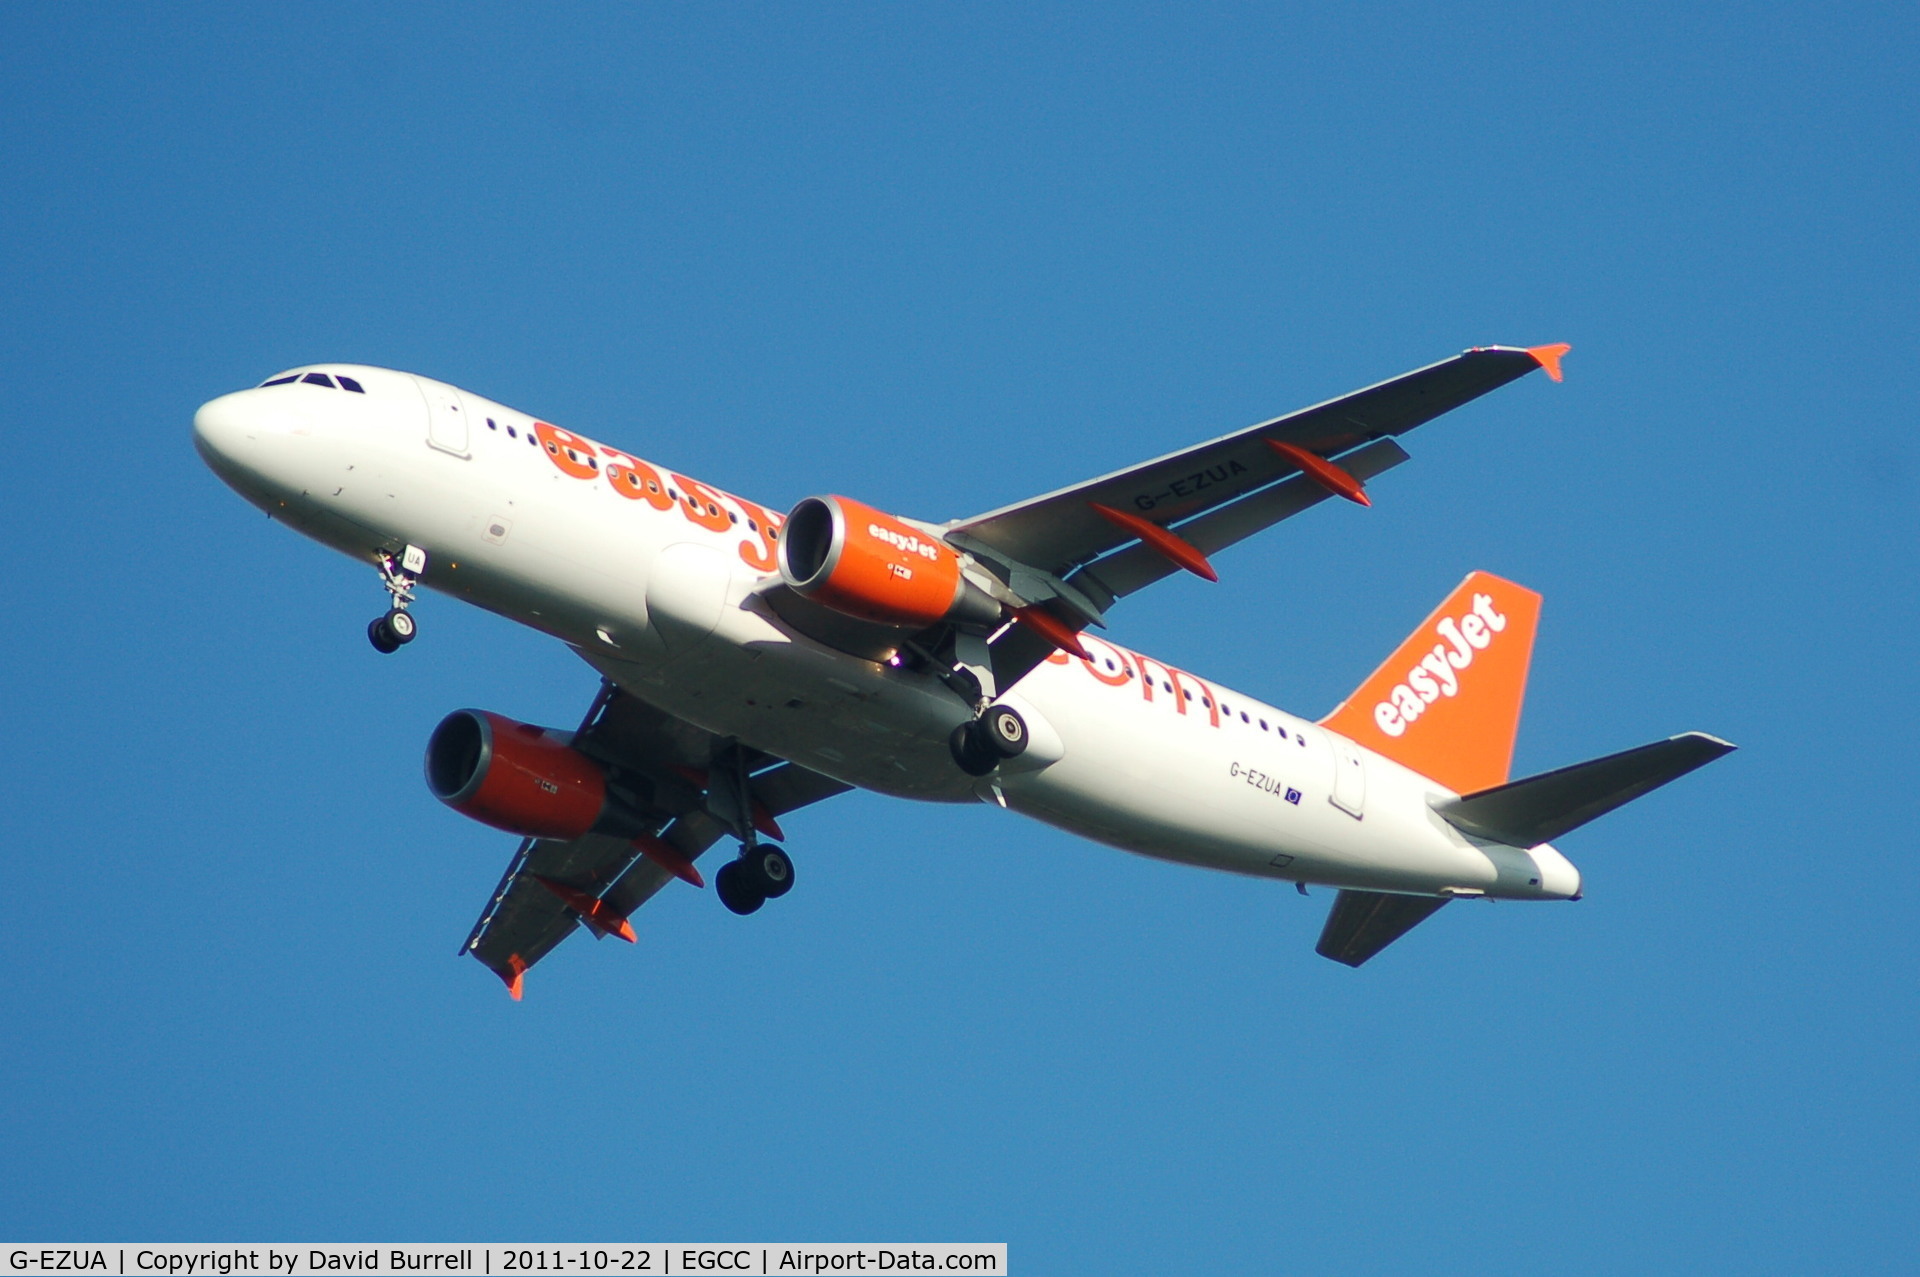 G-EZUA, 2011 Airbus A320-214 C/N 4588, Easyjet Airbus A320-214 on approach Manchester Airport.